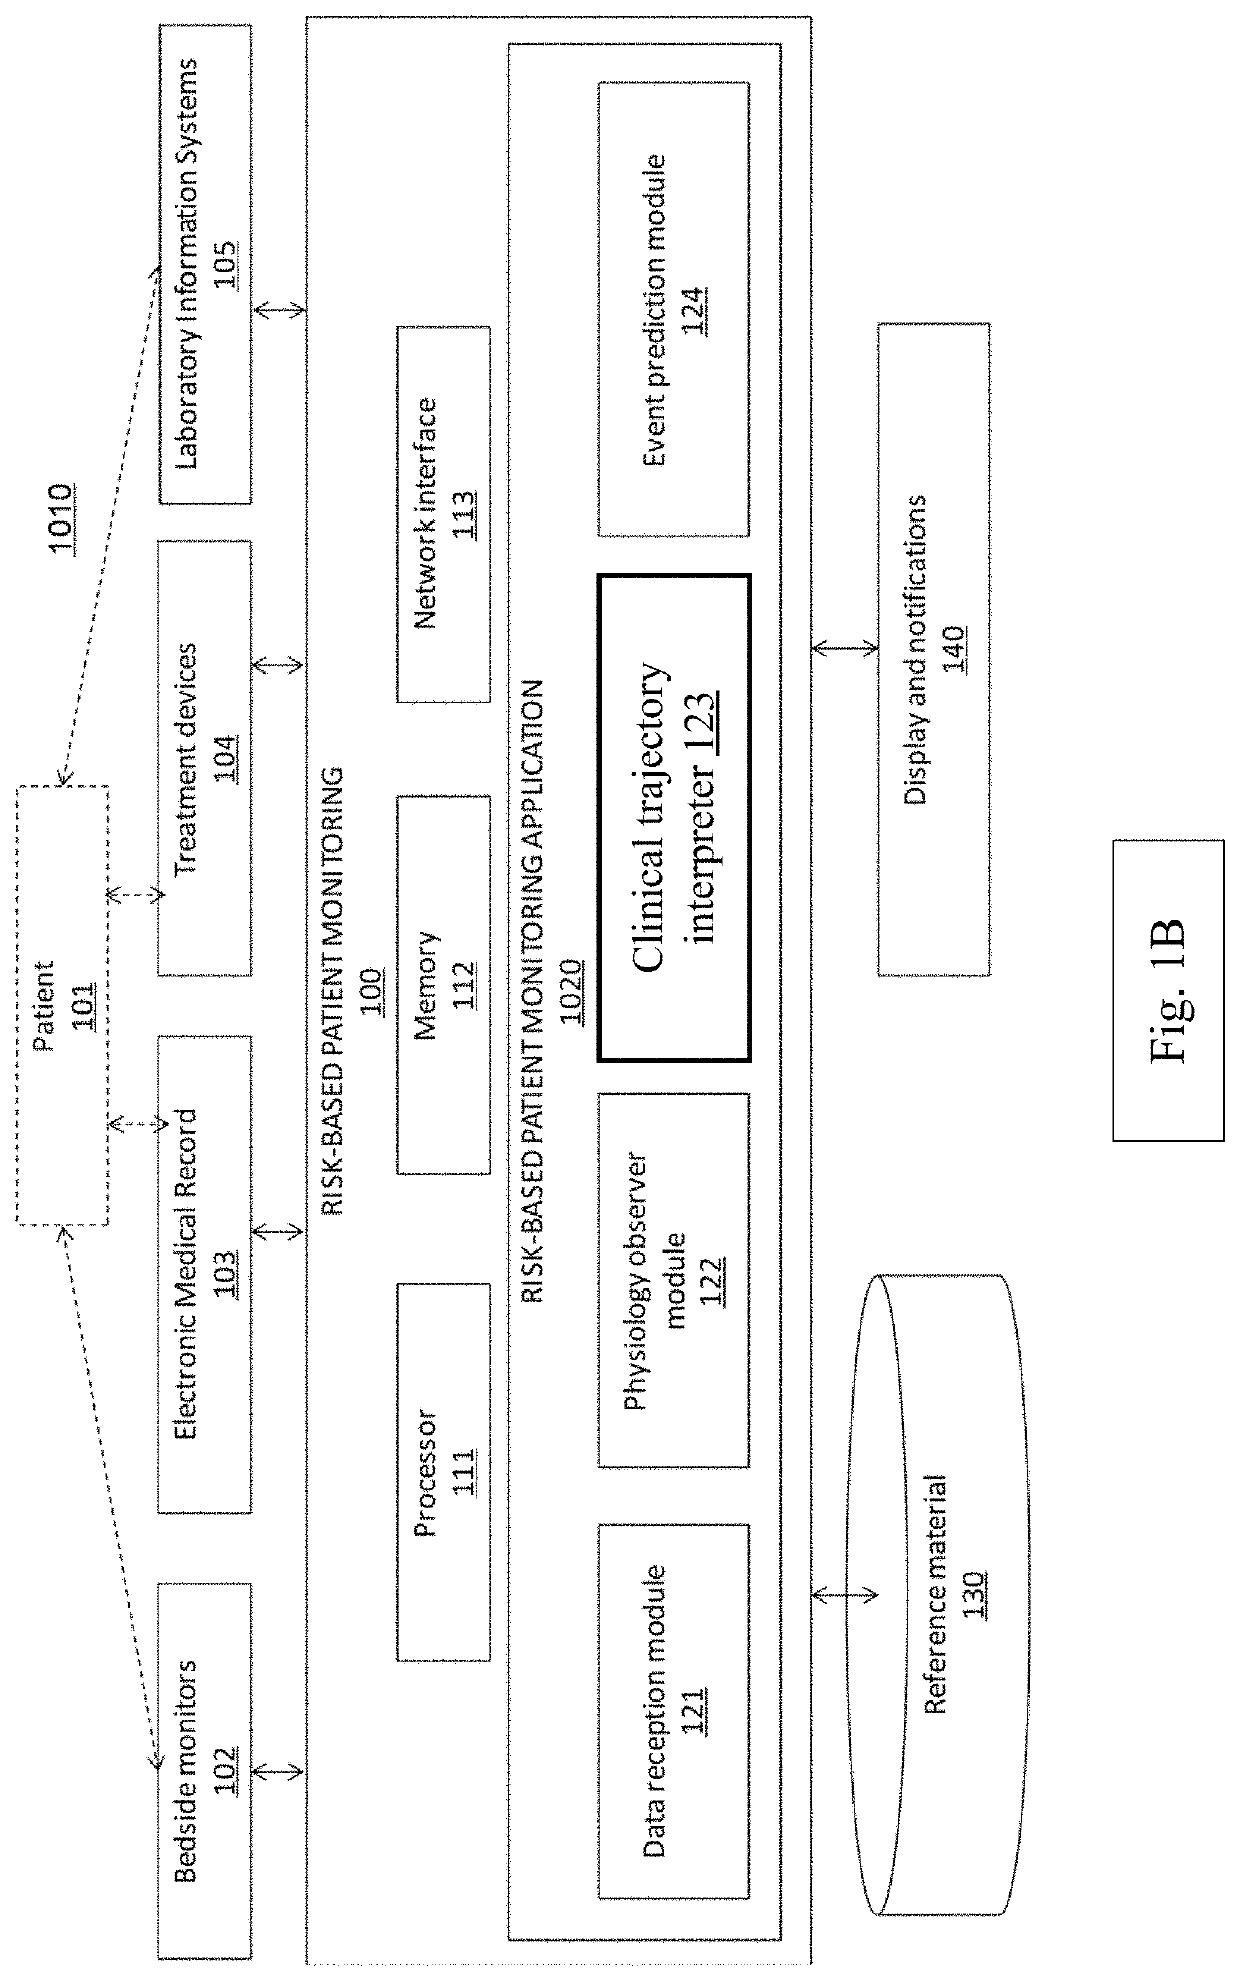 System and methods for transitioning patient care from signal based monitoring to risk based monitoring